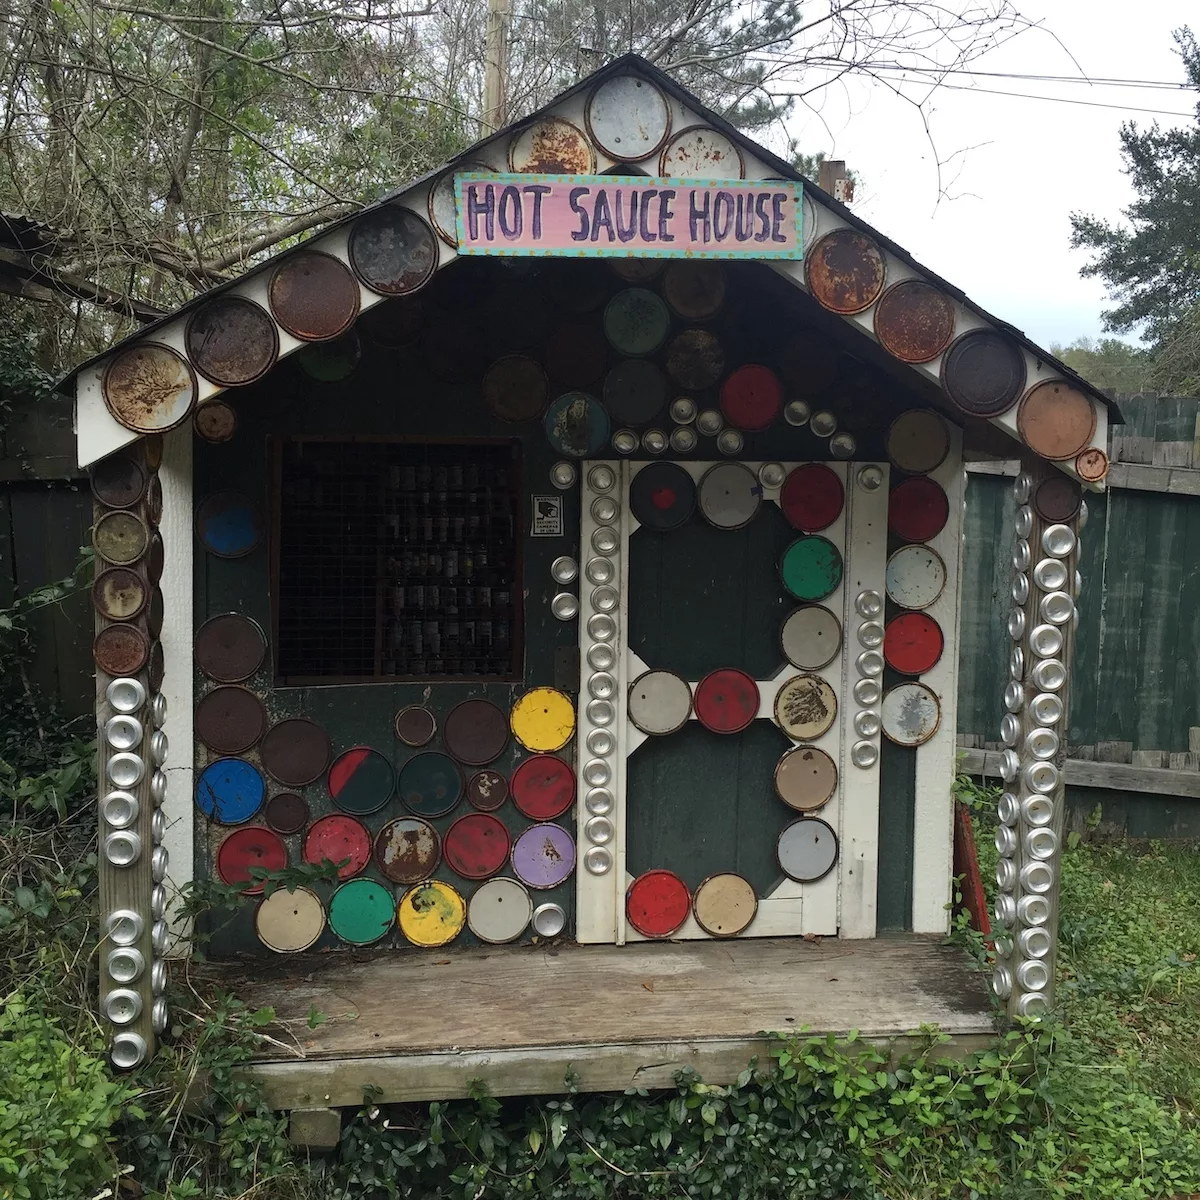 Exterior of the Hot Sauce House at the the Abita Mystery House in Abita Springs, Louisiana